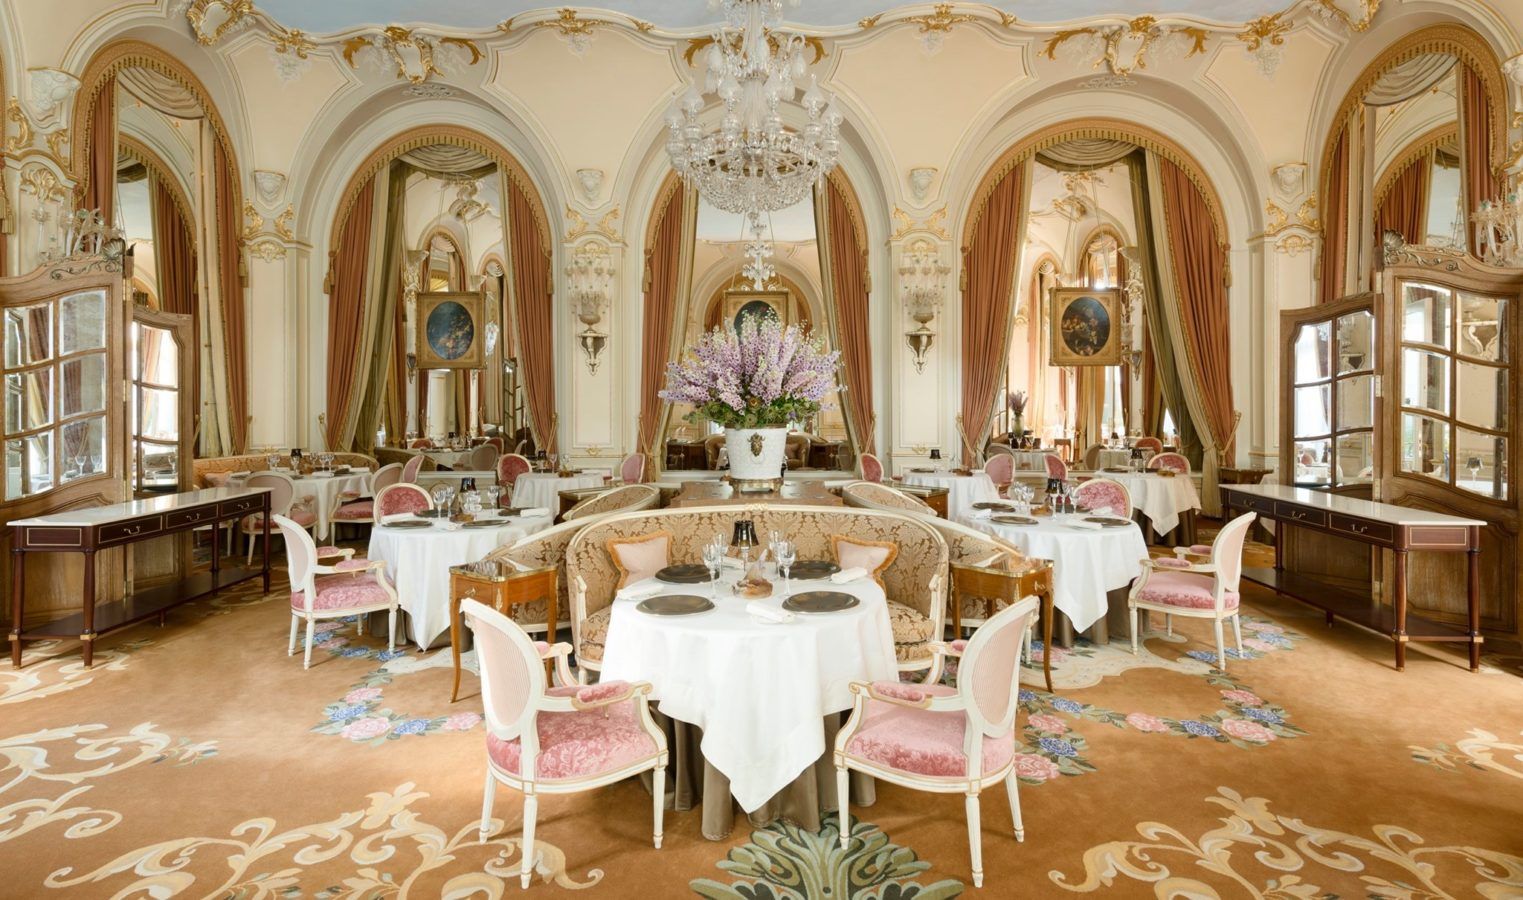 Dinner like at the Ritz Paris: tableware from the iconic hotel is going up for auction